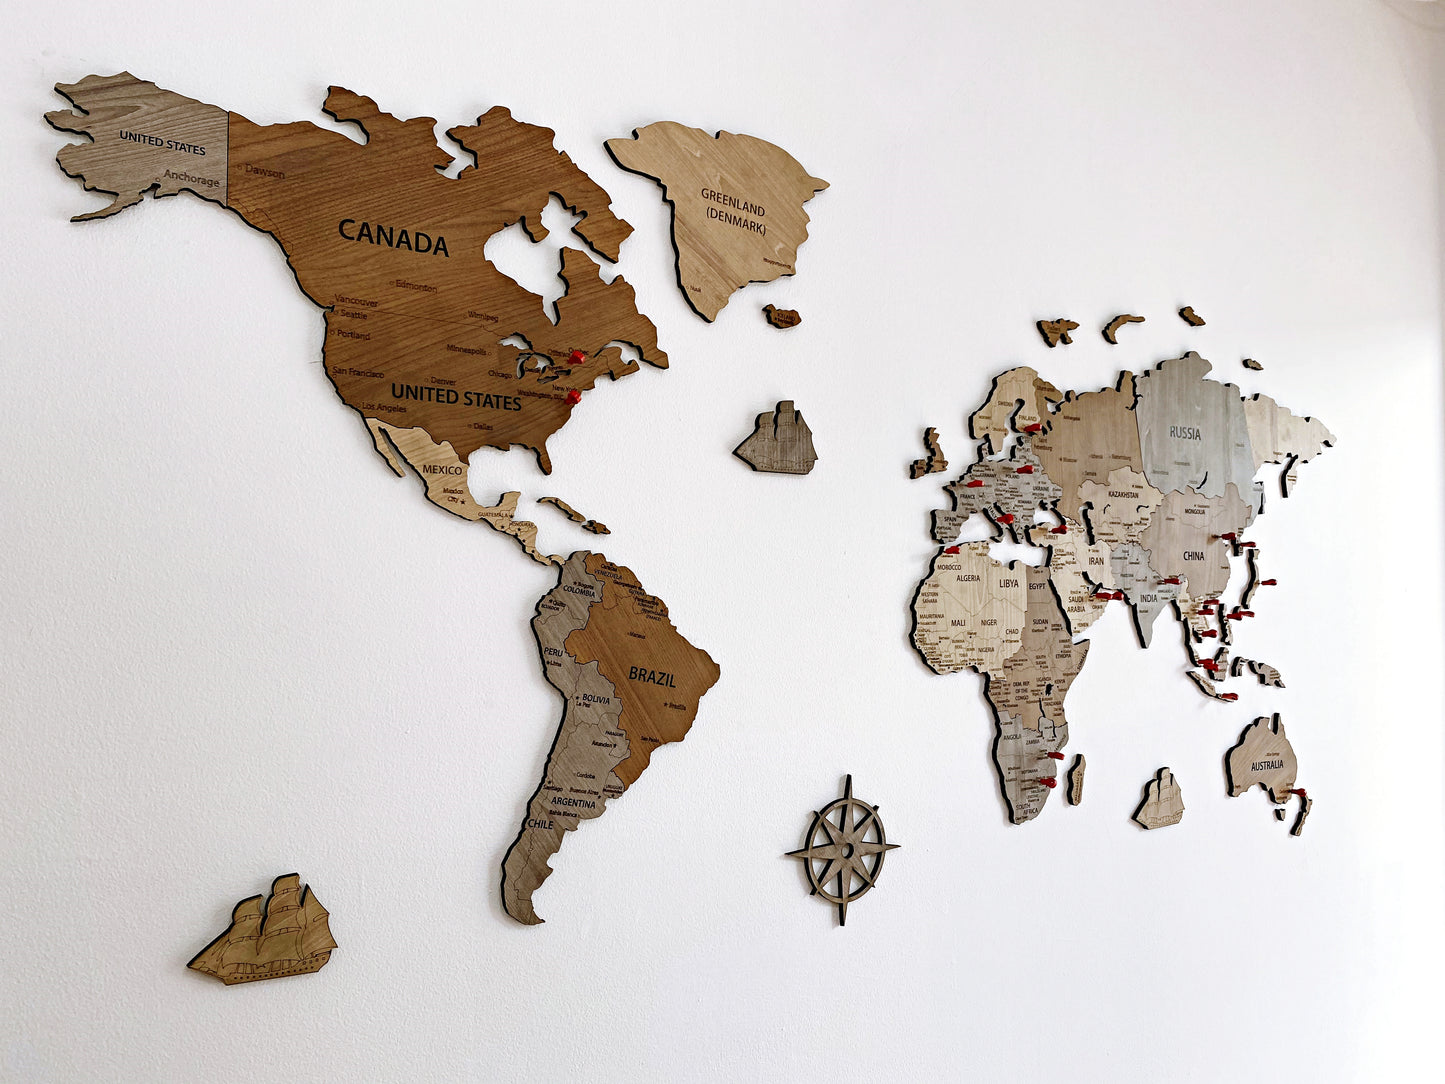 World map wooden map wall decor, wooden home decoration, wall art map, livingroom, kitchen, bedroom rustic decor - 01